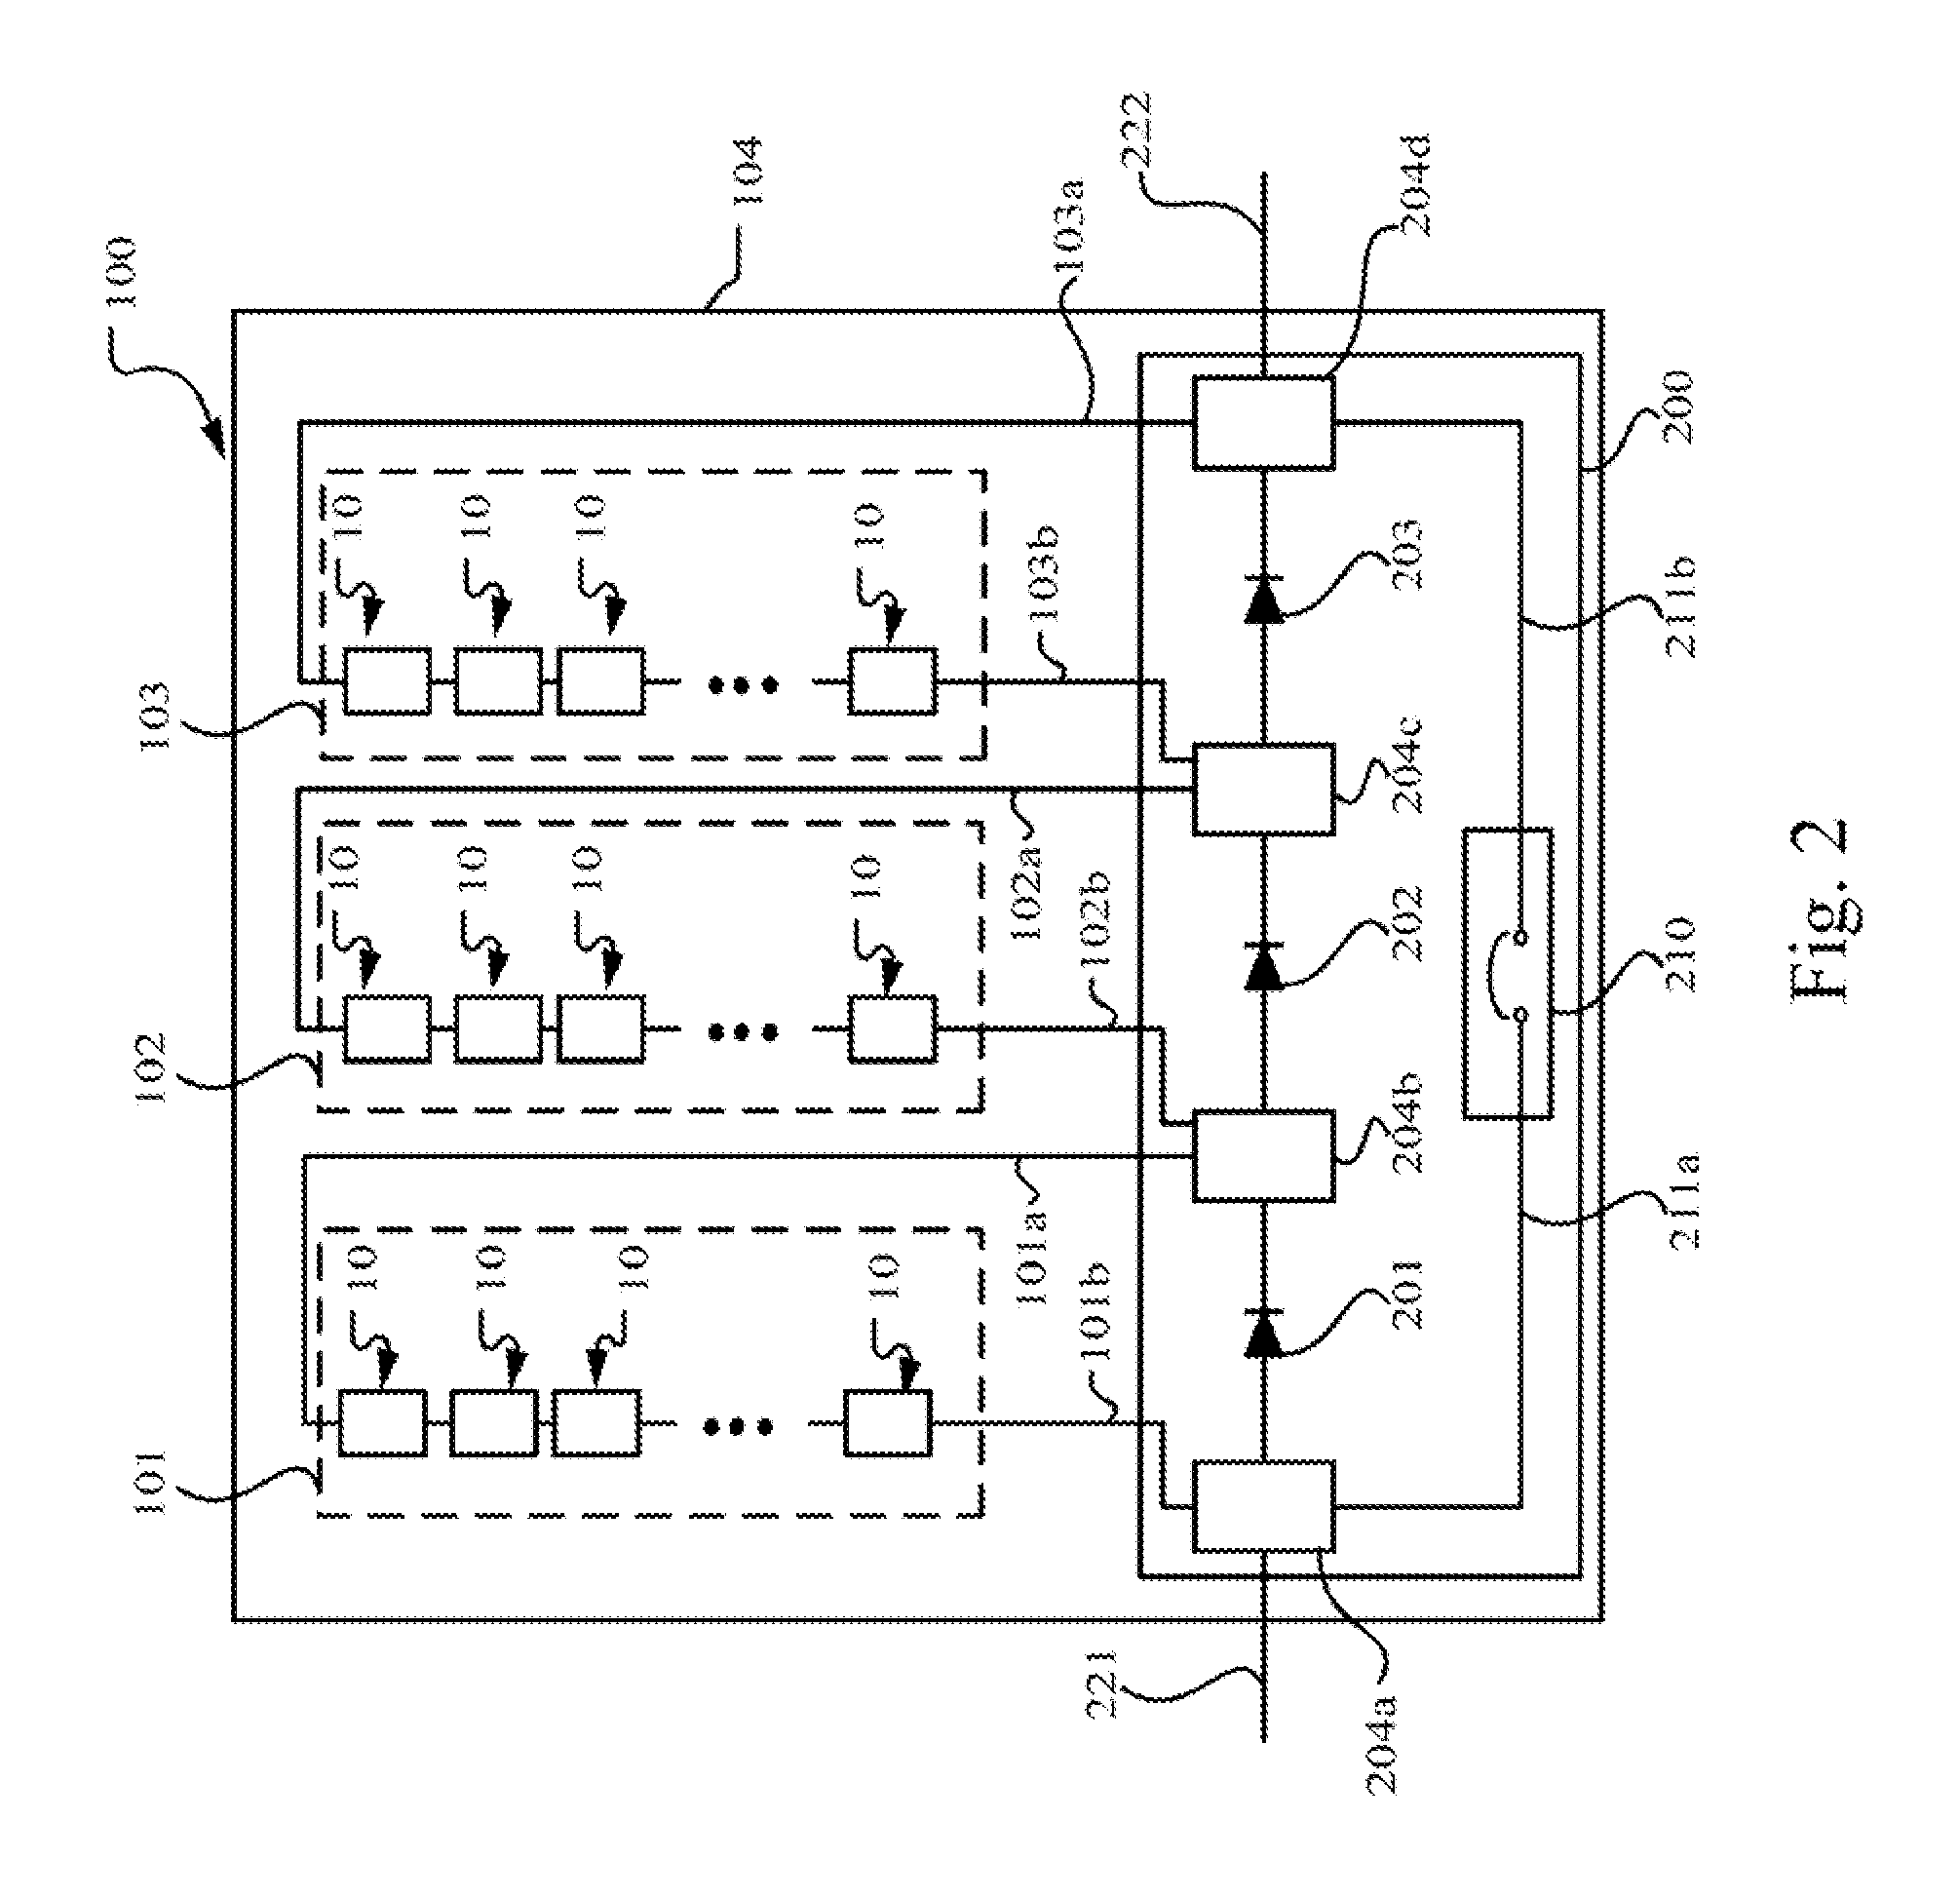 Thermostatically controlled terminal box and photovoltaic power generation system utilizing the same